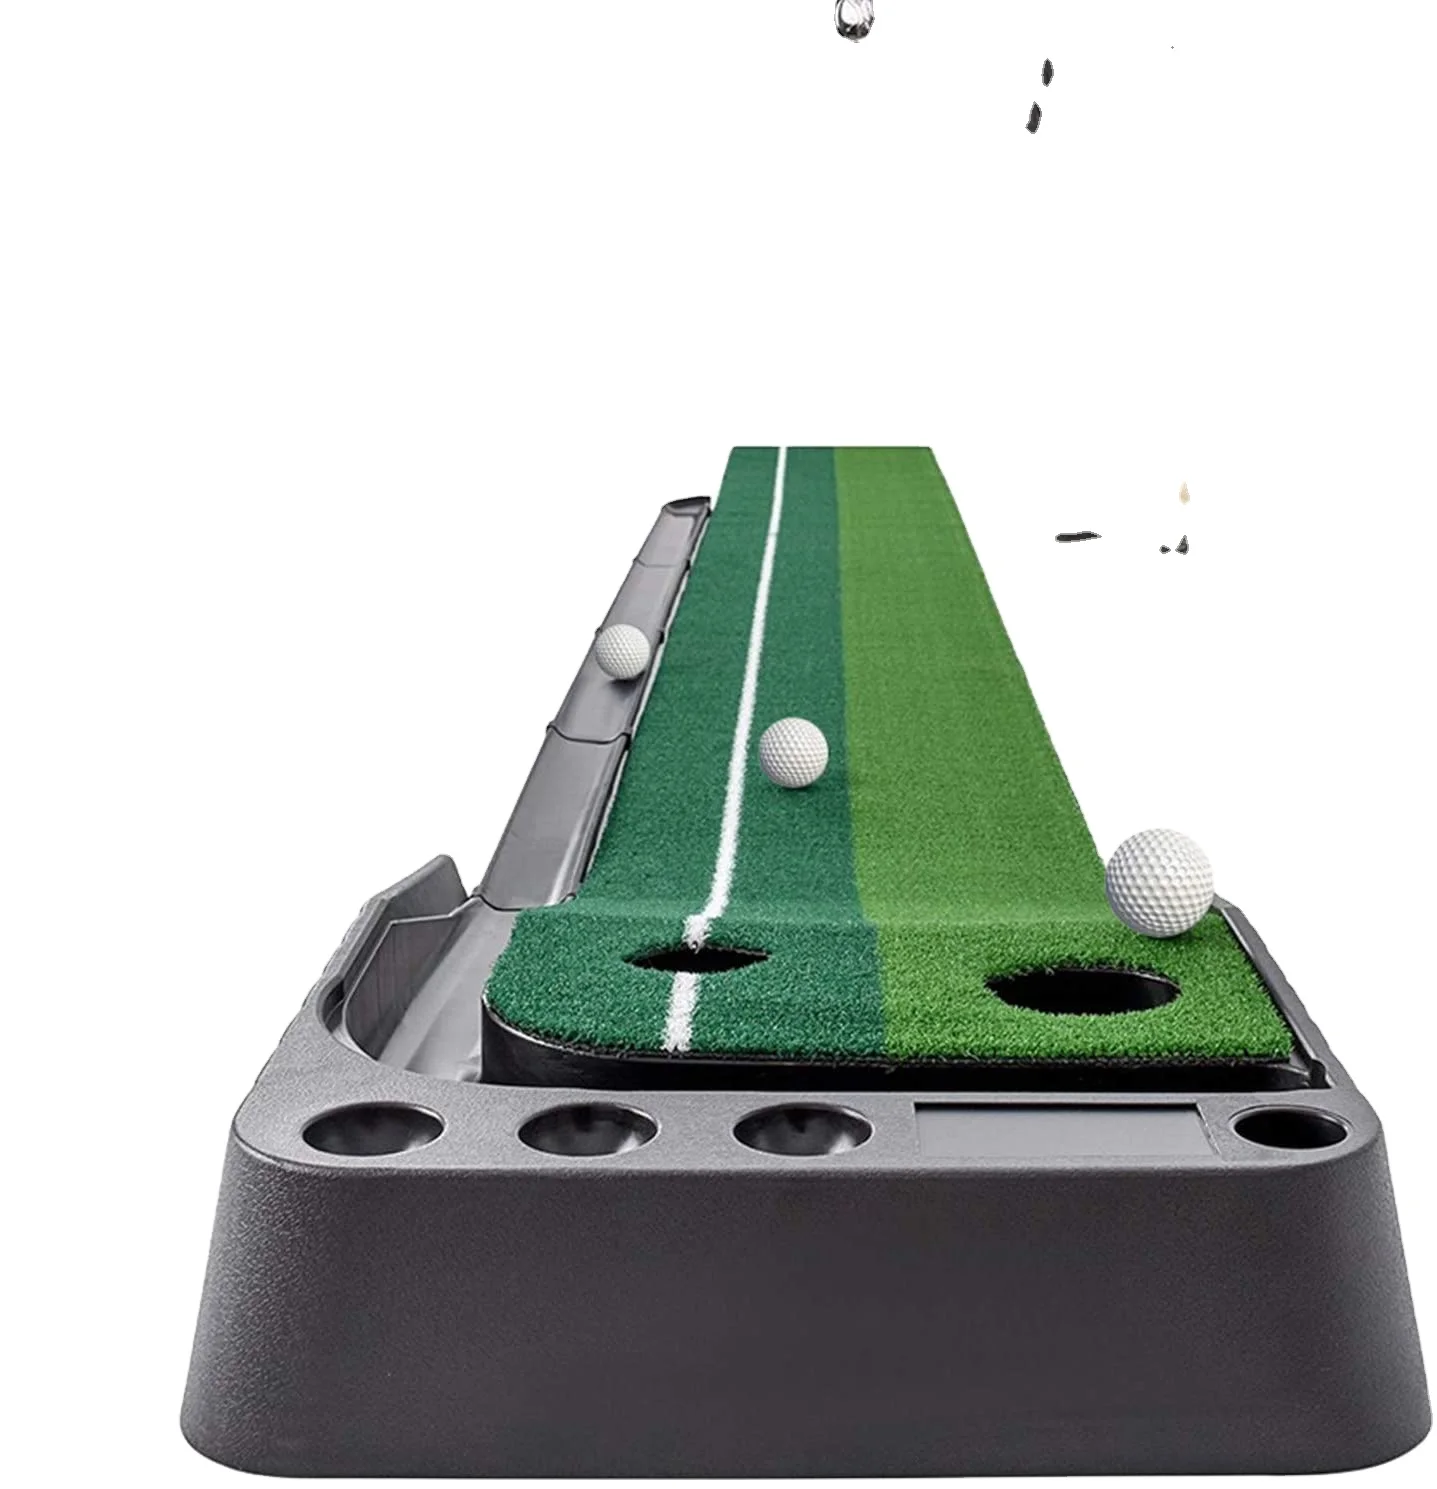 

Mini Golf Practice Training Aid Putting Trainer Indoor Golf Putting Green Home Putting Portable Mat with Auto Ball Return